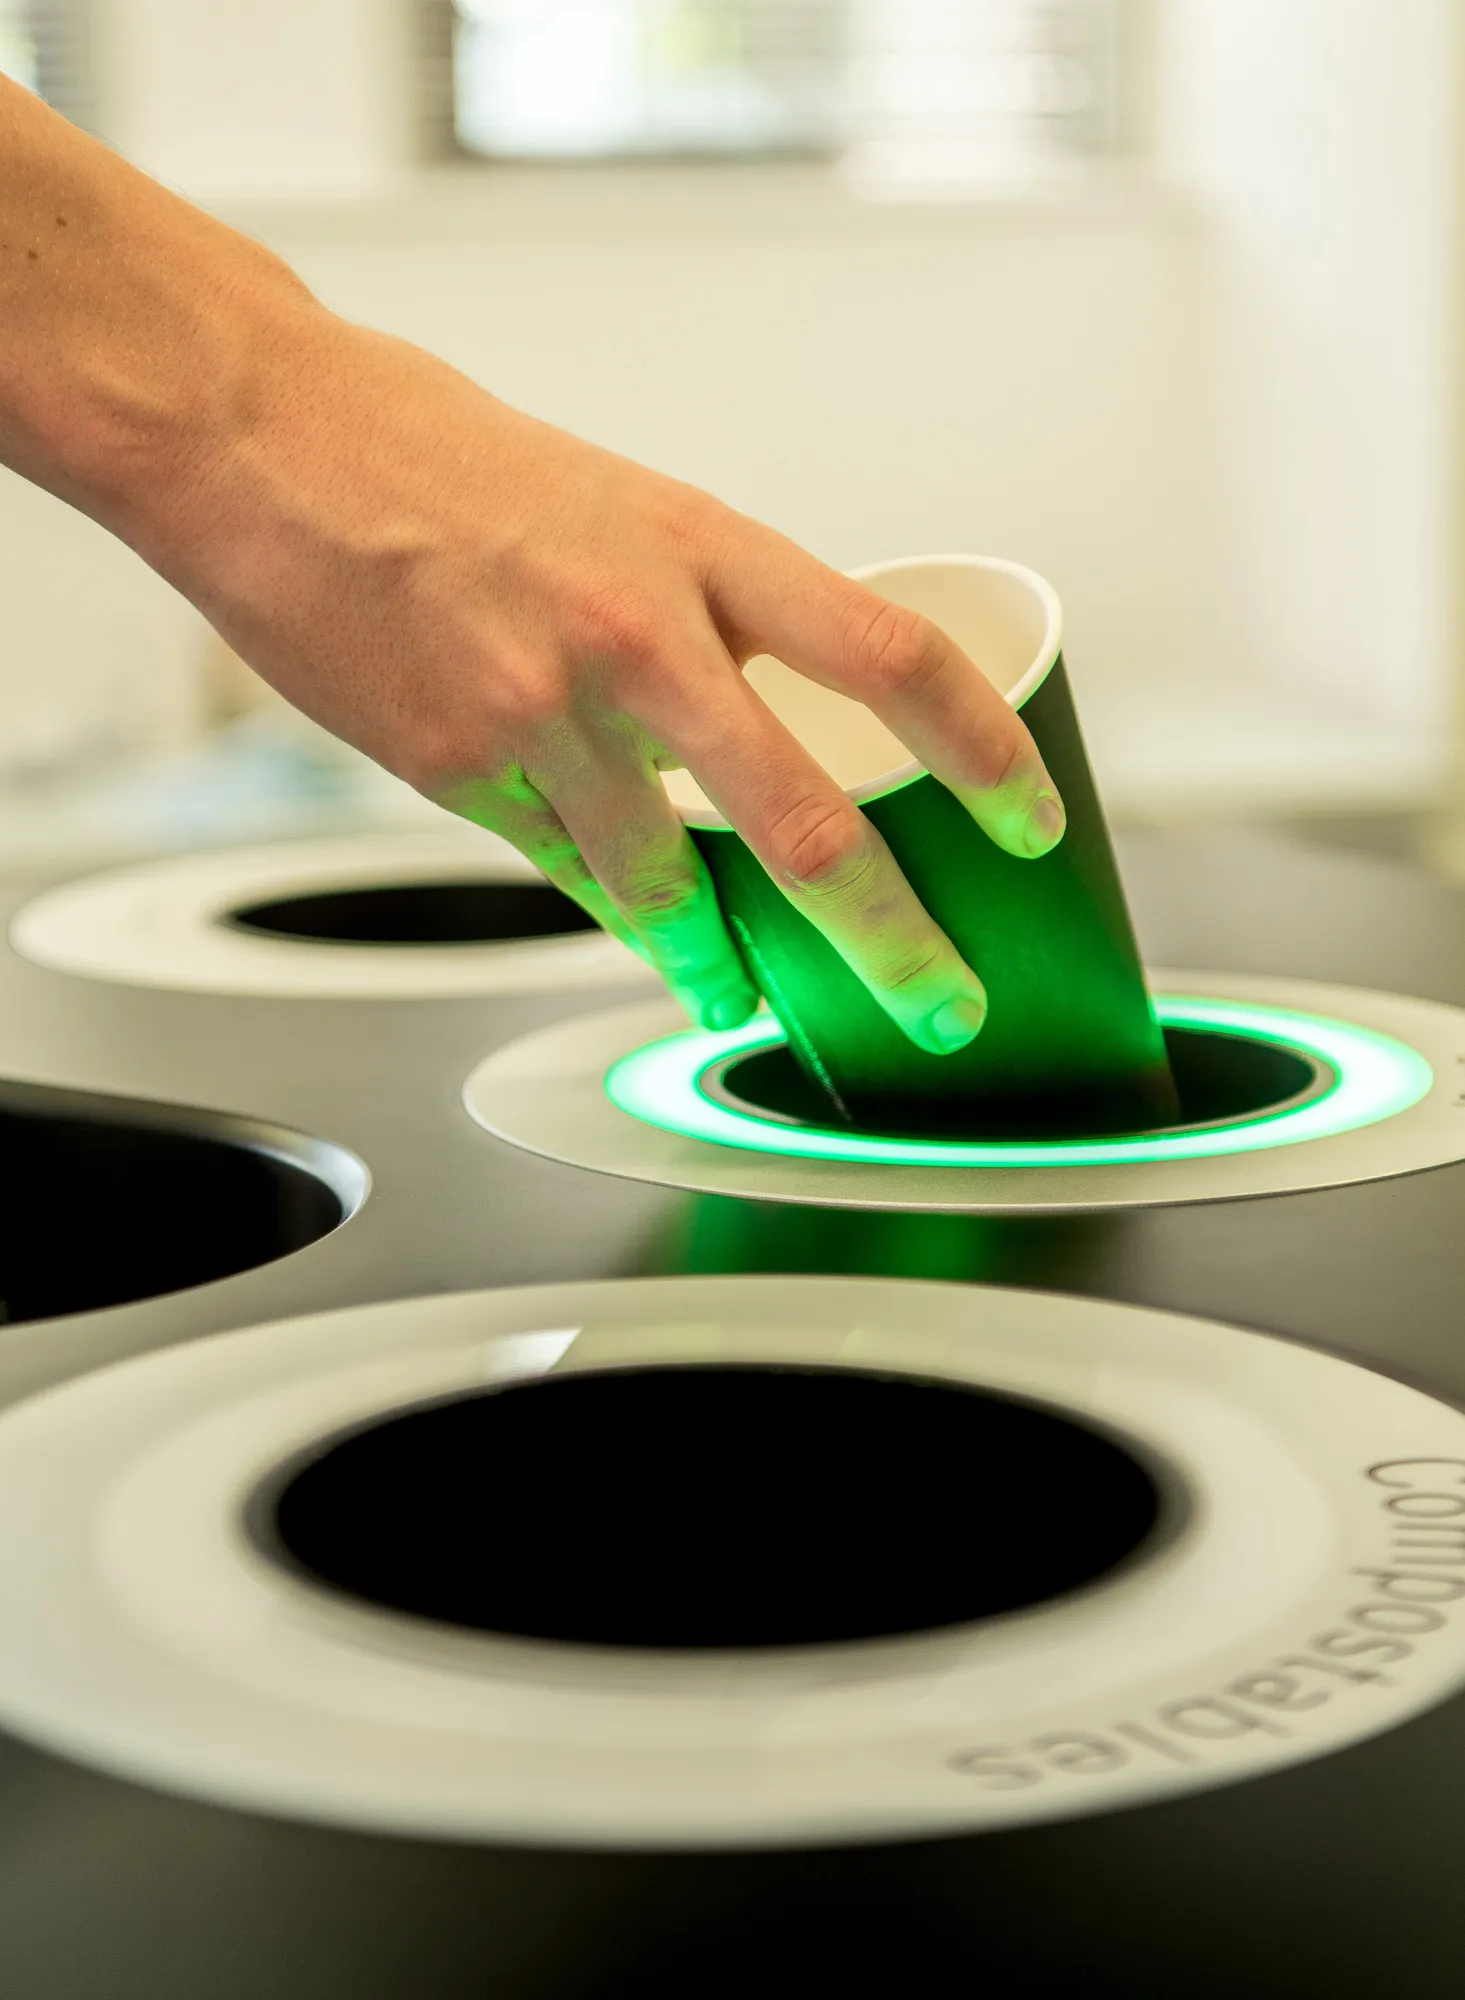 A Smart Recycling Bin Could Sort Your Waste for You, Innovation